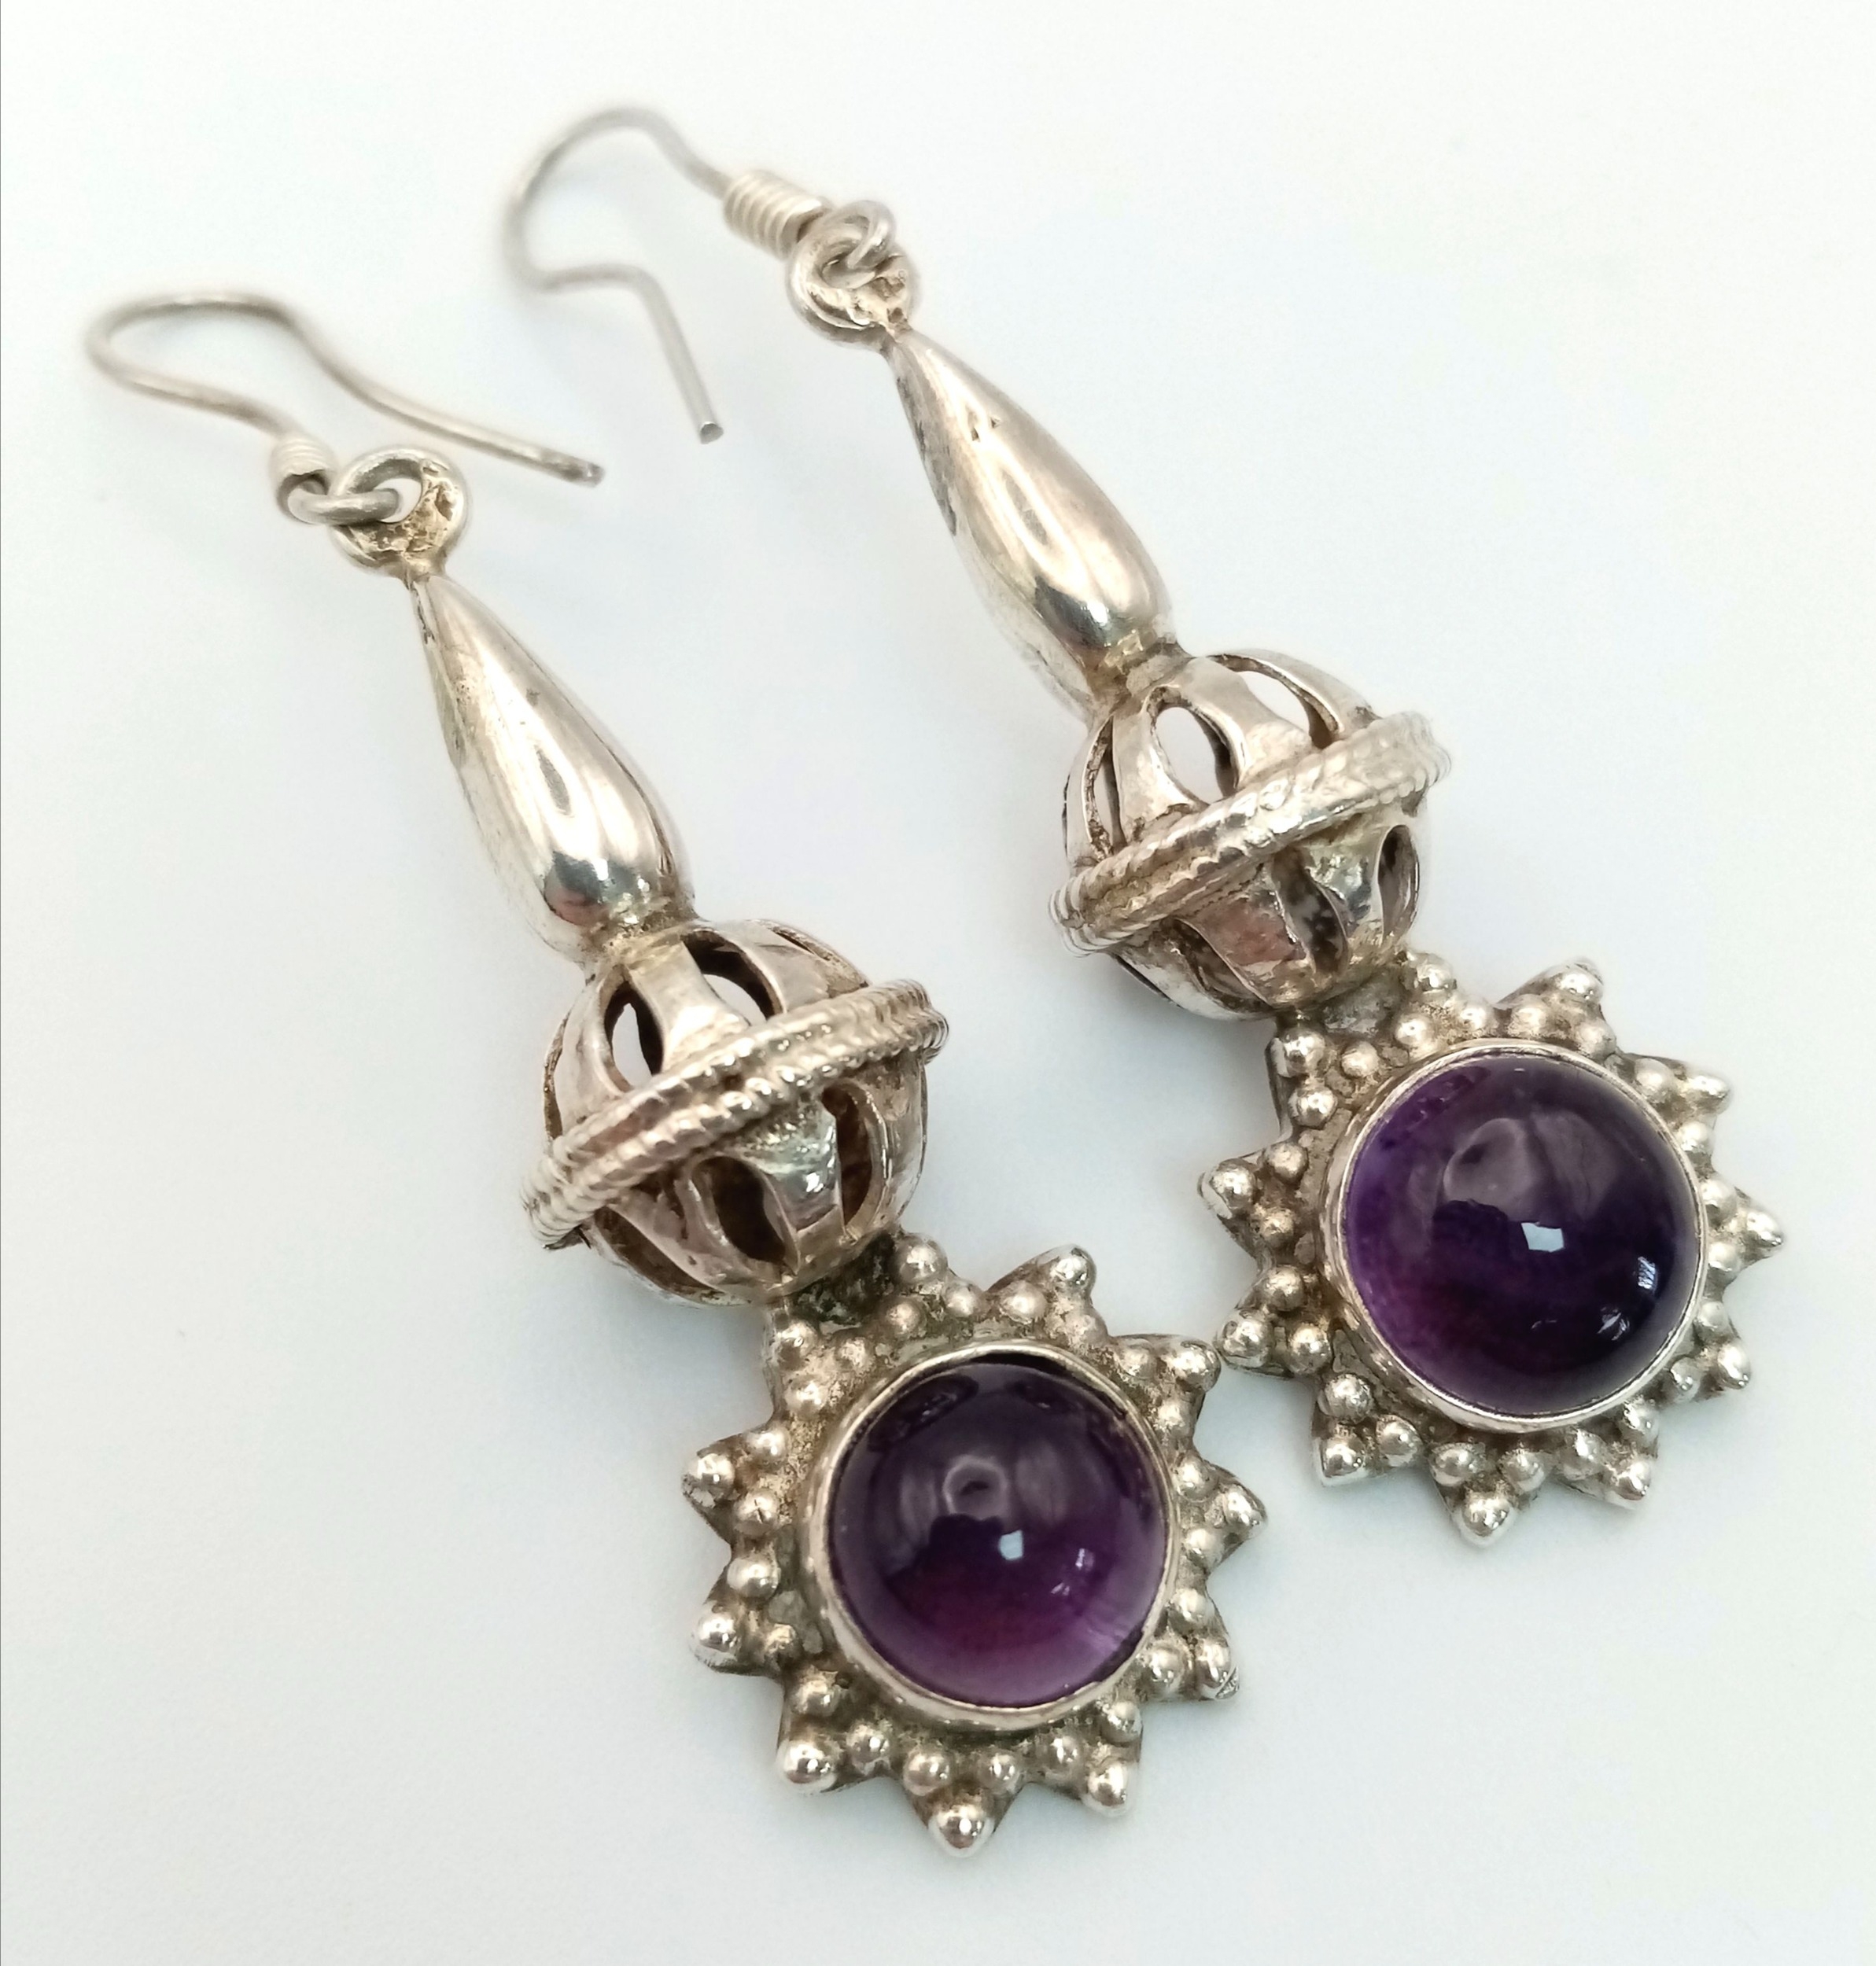 A Pair of Sterling Silver and Amethyst Drop Earrings. Decorative 4cm drops with amethyst cabochons.